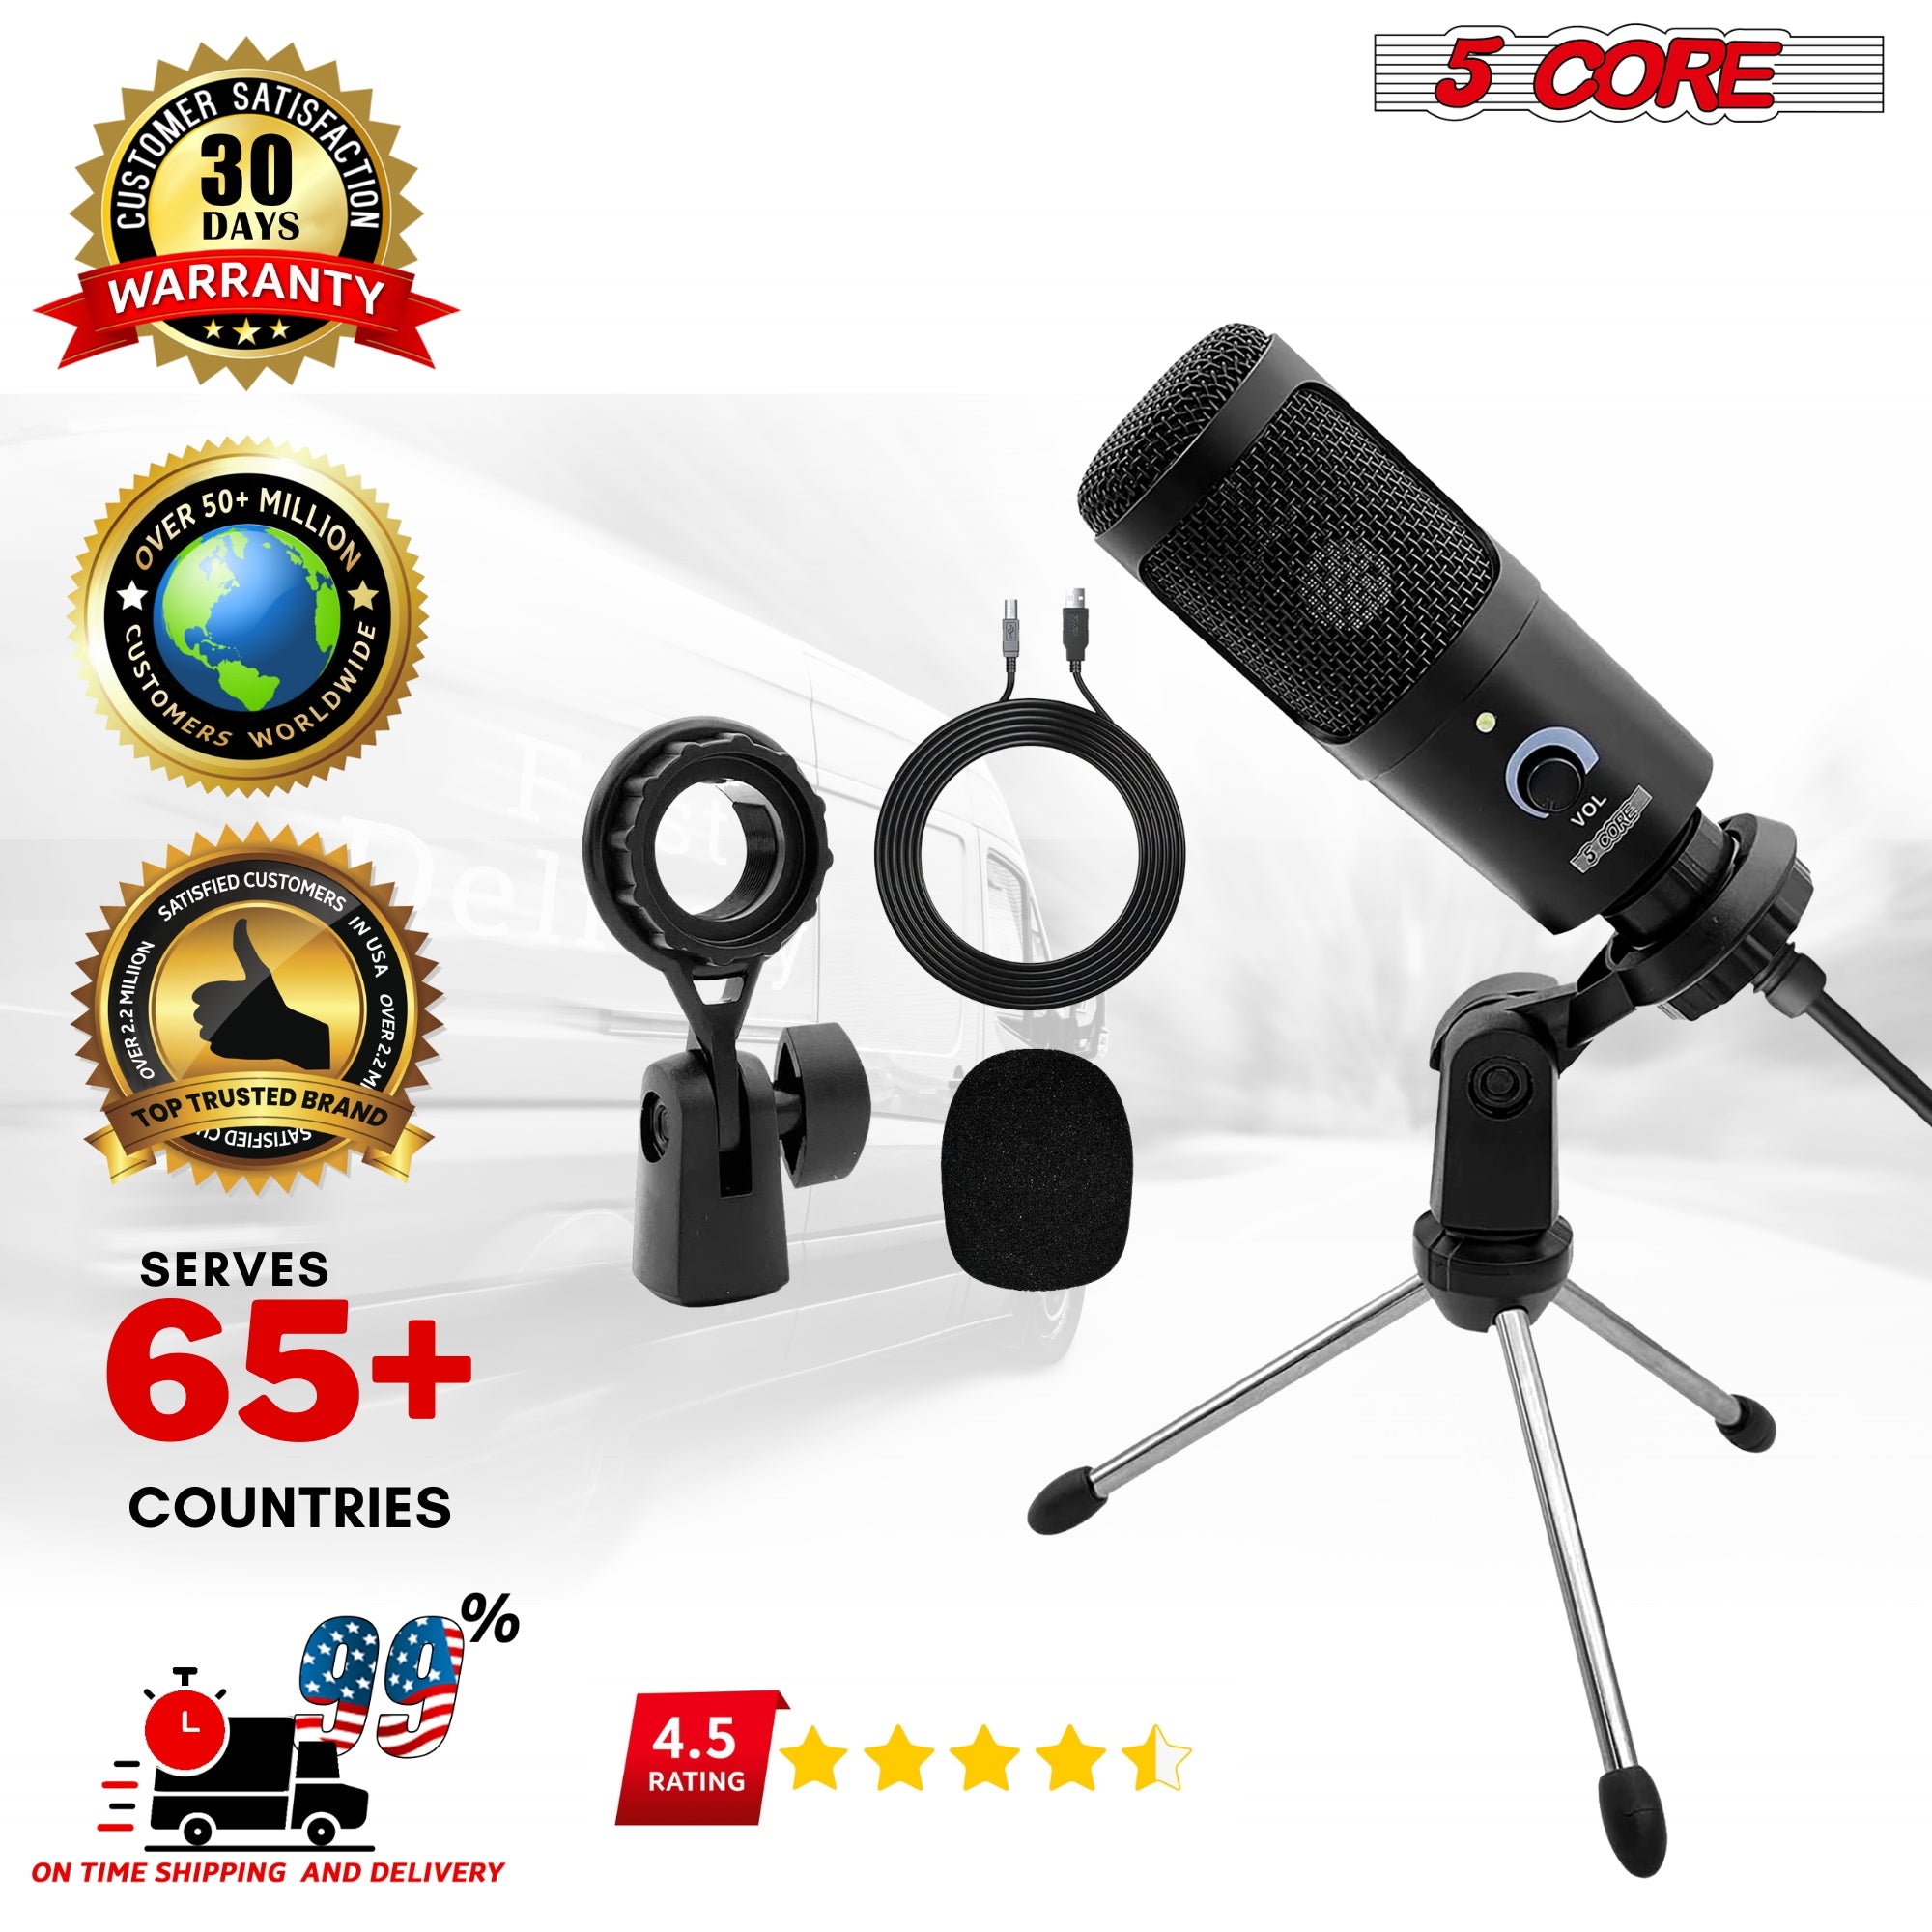 5Core Recording Microphone Podcast Bundle  Professional Condenser Cardioid Mic Kit  w Desk Stand